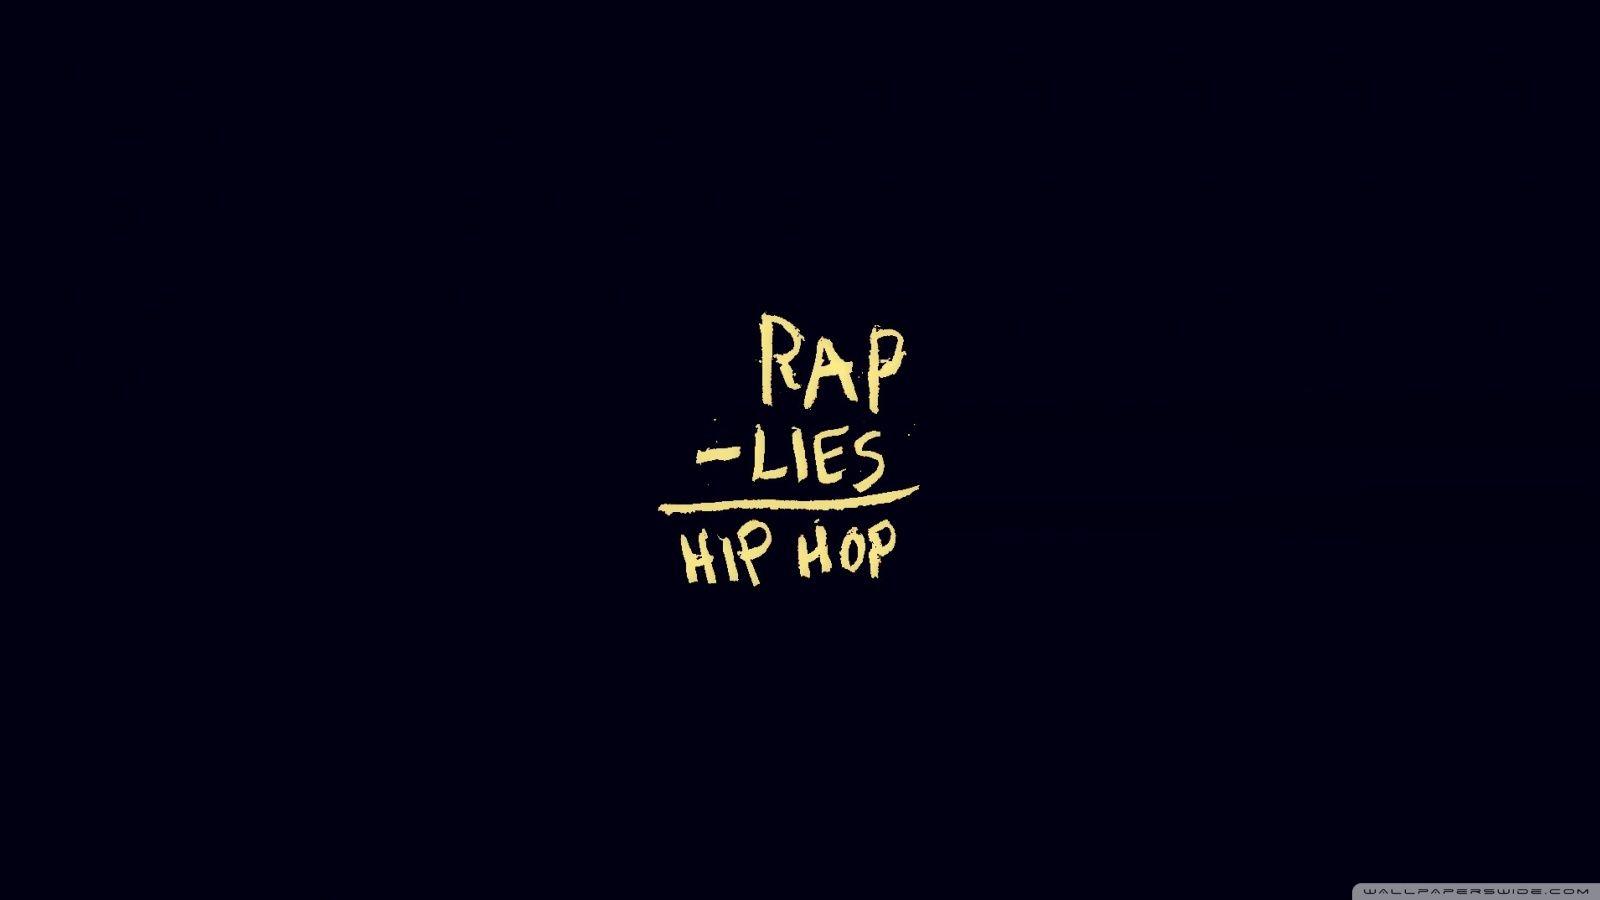 Hip Hop Music Wallpapers Top Free Hip Hop Music Backgrounds